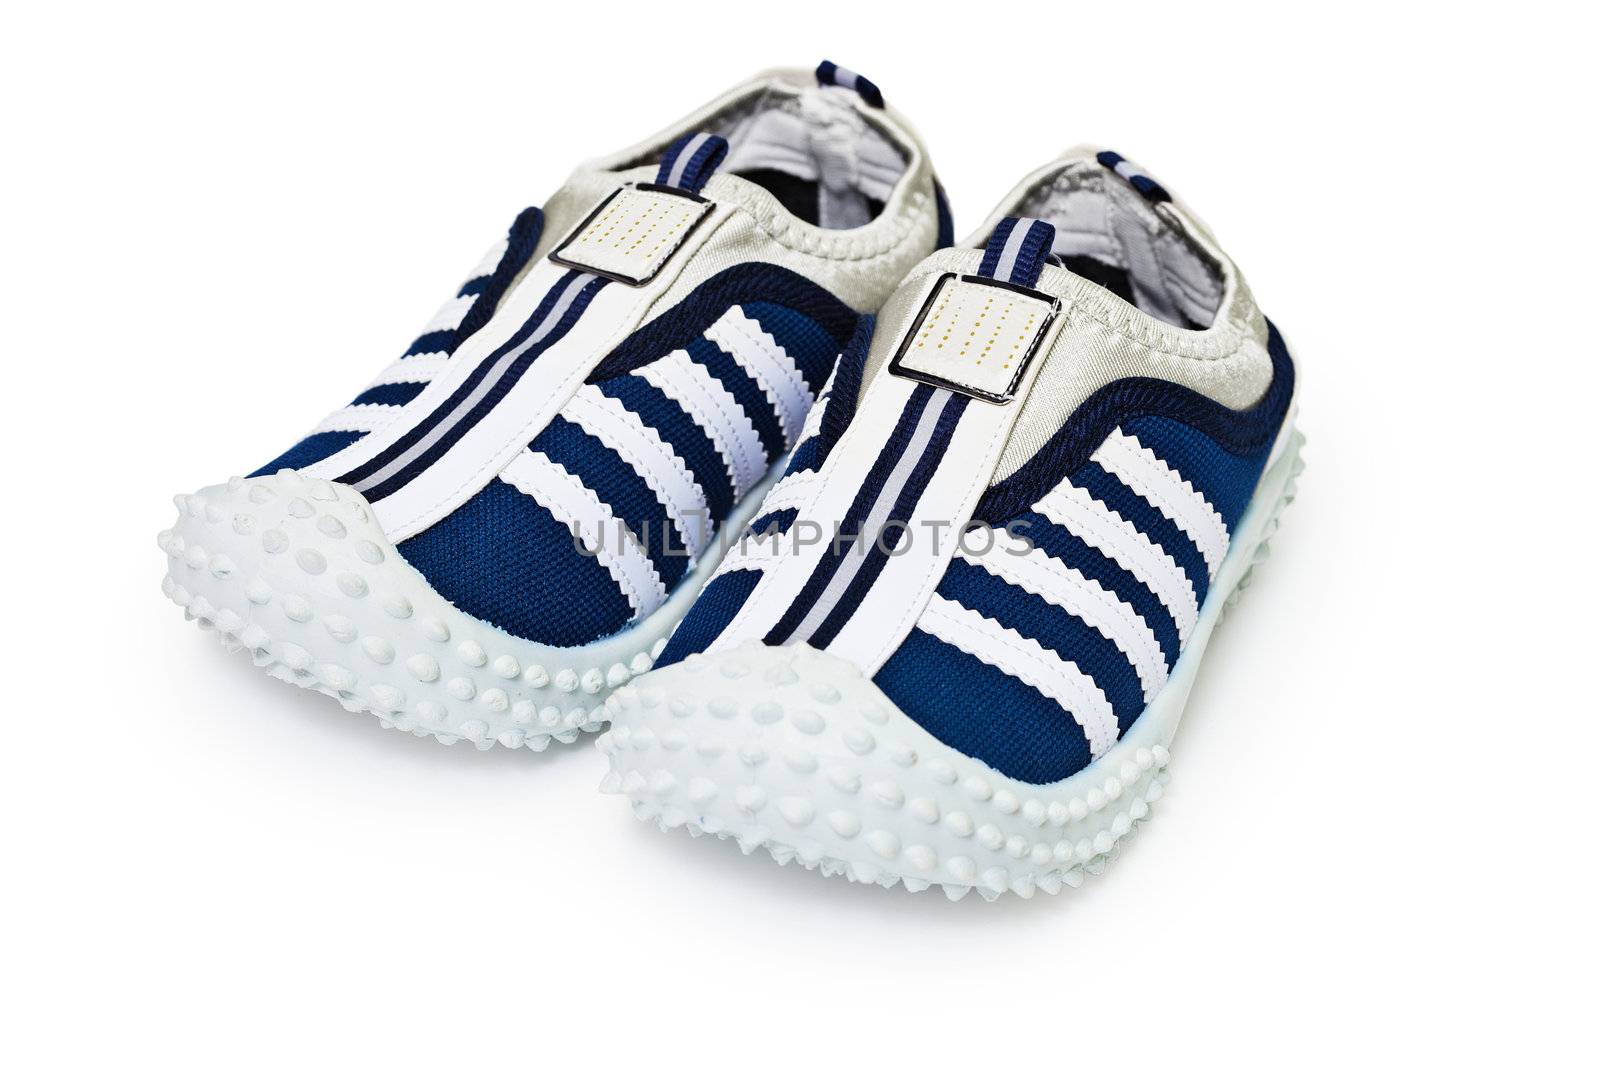 Sports inexpensive shoes on white by pzaxe